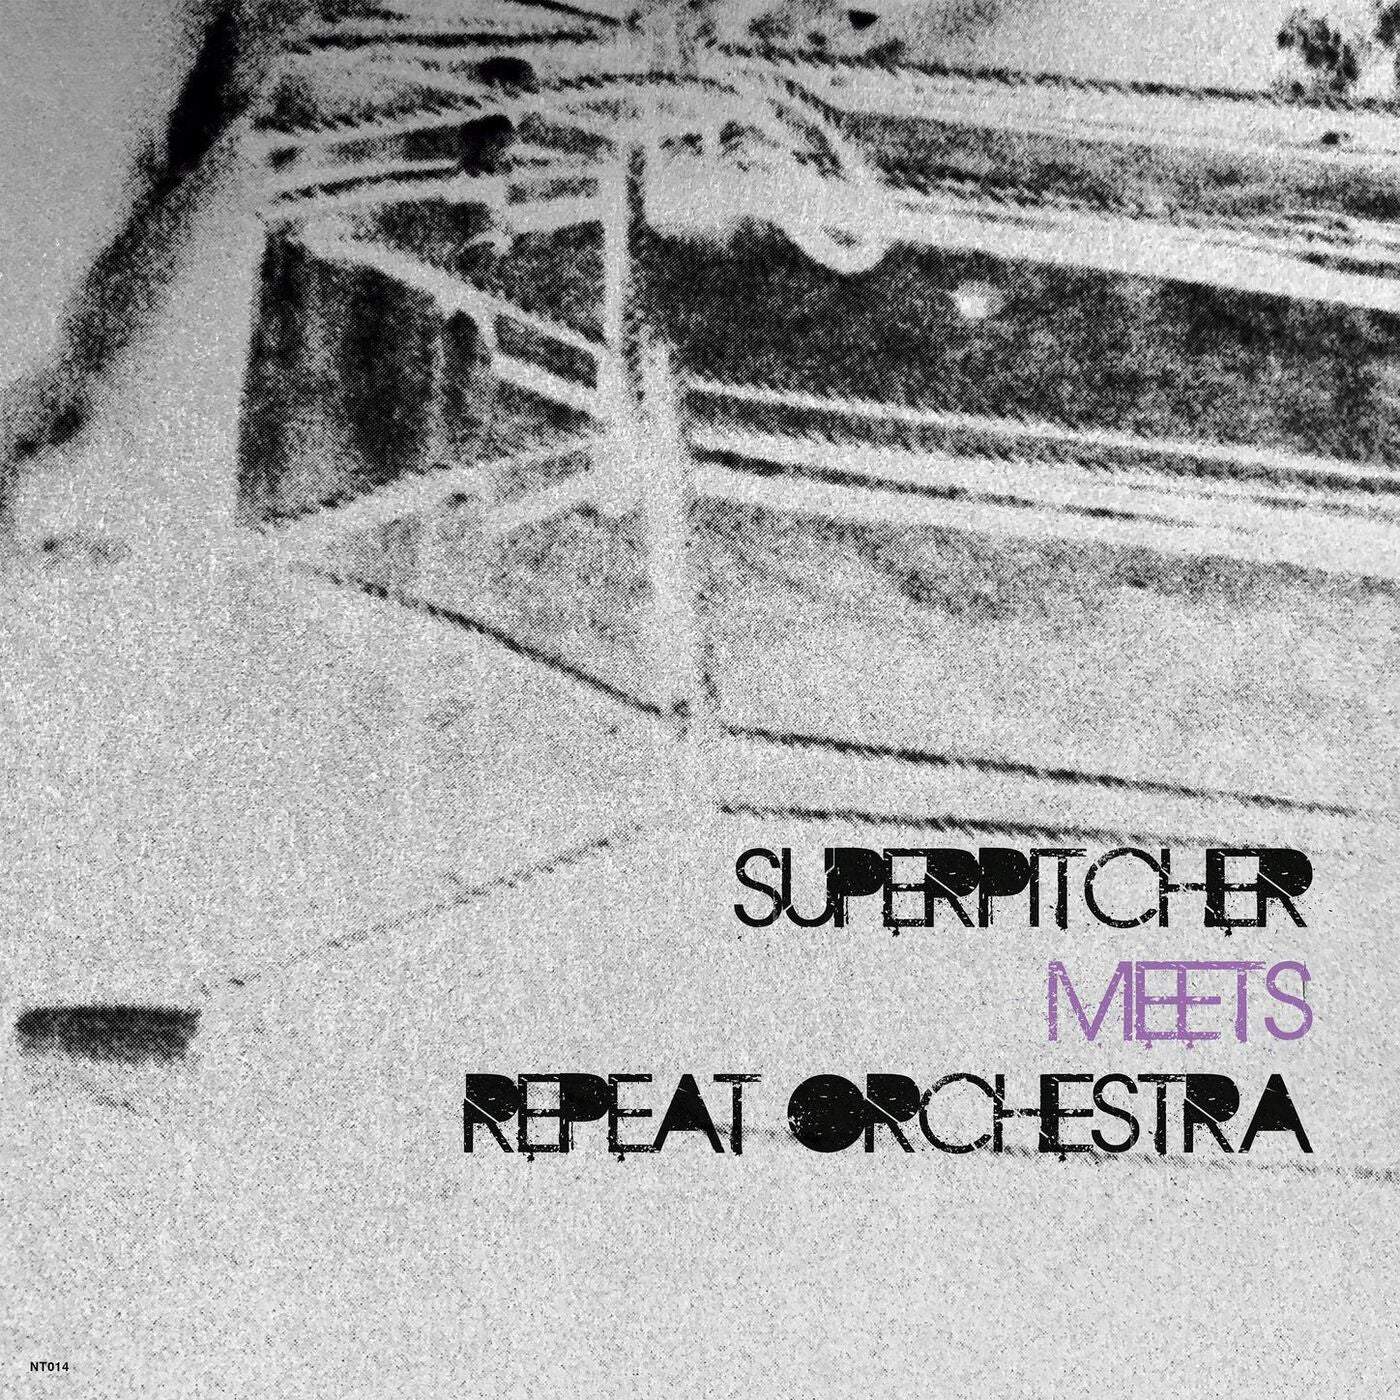 Download Superpitcher, Repeat Orchestra - Superpitcher Meets Repeat Orchestra on Electrobuzz